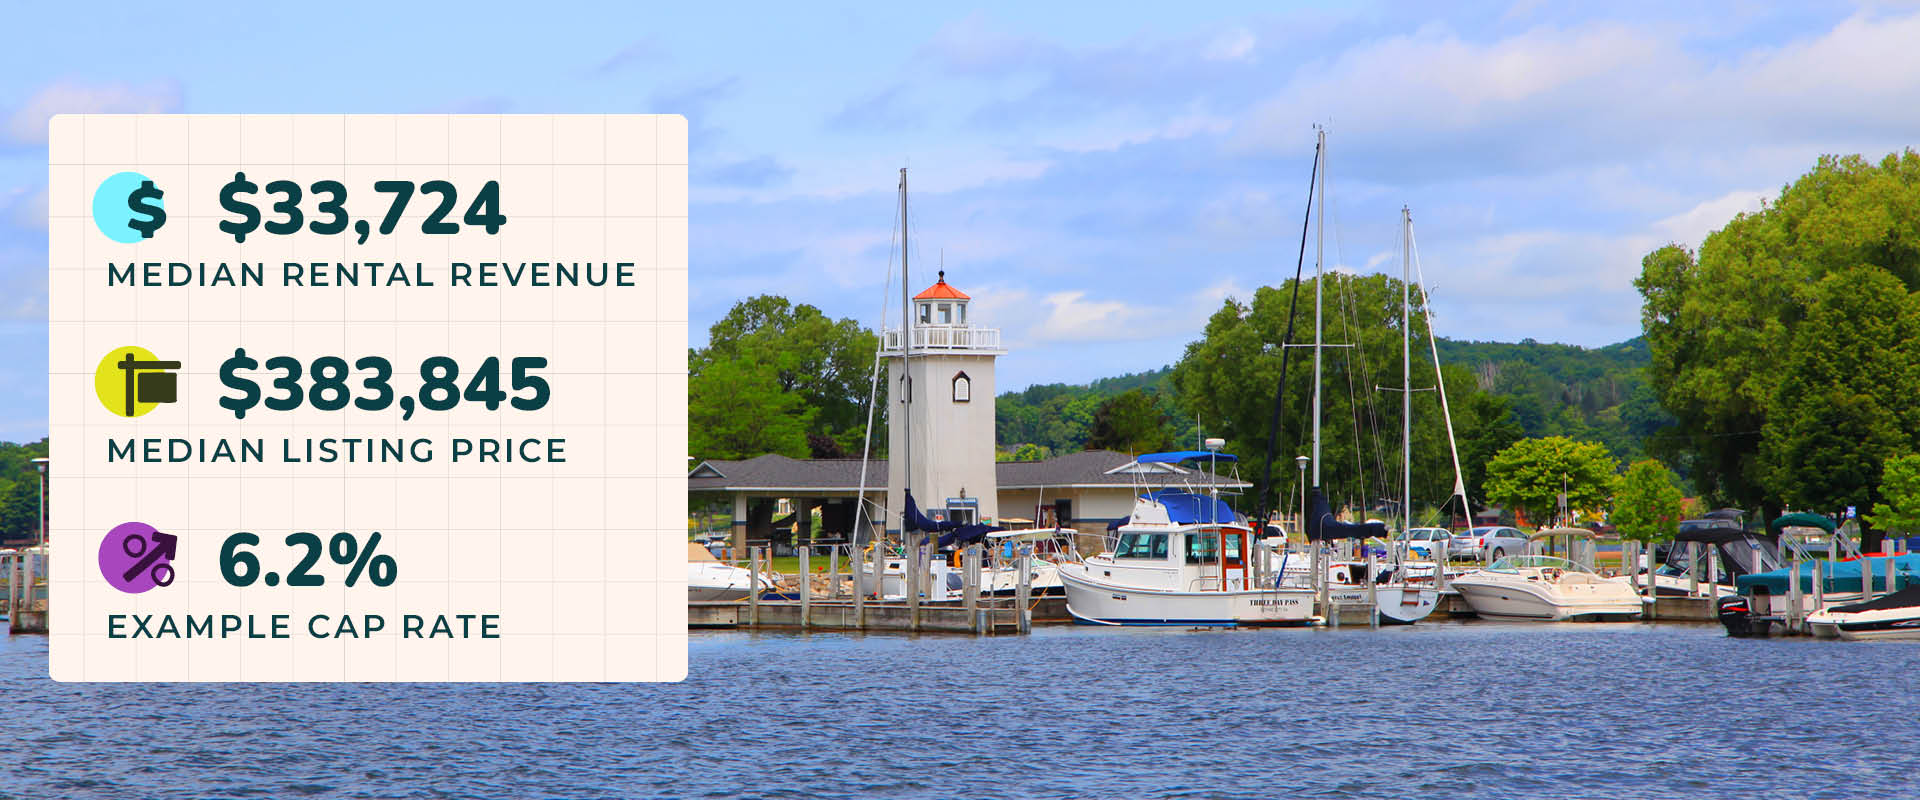 Photo of a harbor in Boyne City, MI with boats docked on the shore by a small lighthouse. Image text reads, "$33,724 median rental revenue. $383,845 median listing price. 6.2% example cap rate," showcasing this area as one of the best places to buy a cabin.